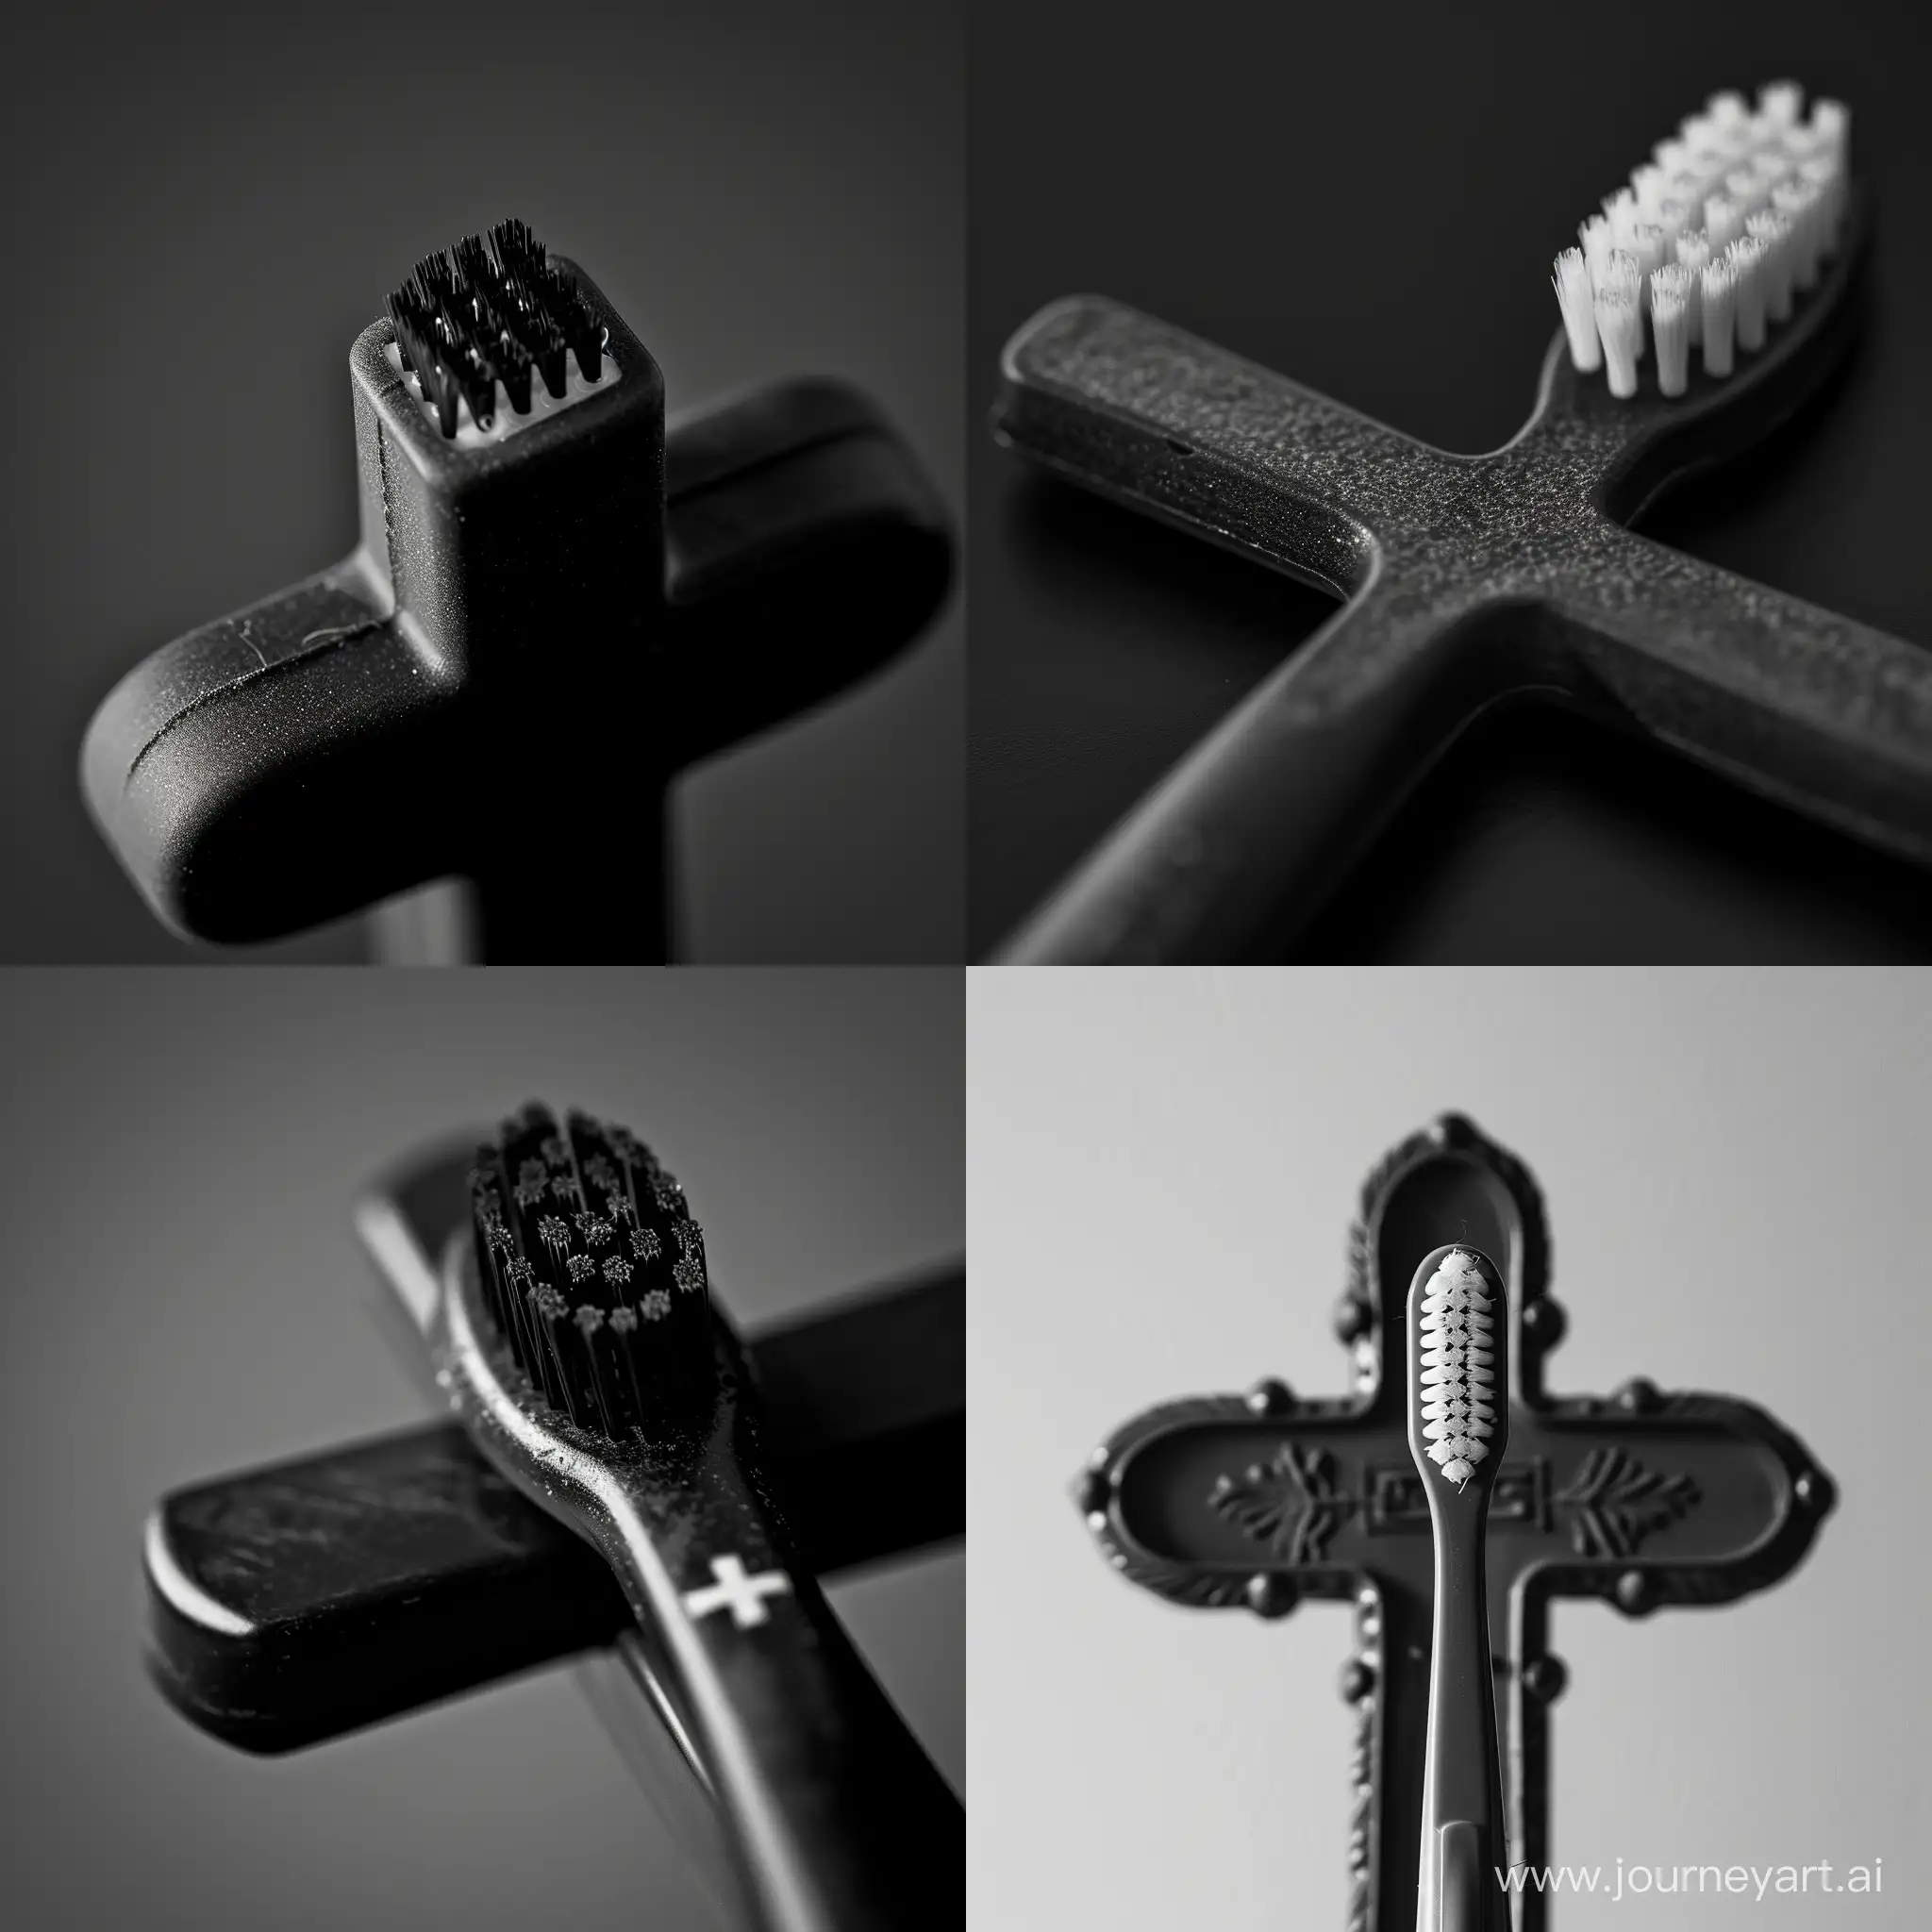 Monochrome-CloseUp-Detailed-Cross-on-Cross-with-Toothbrush